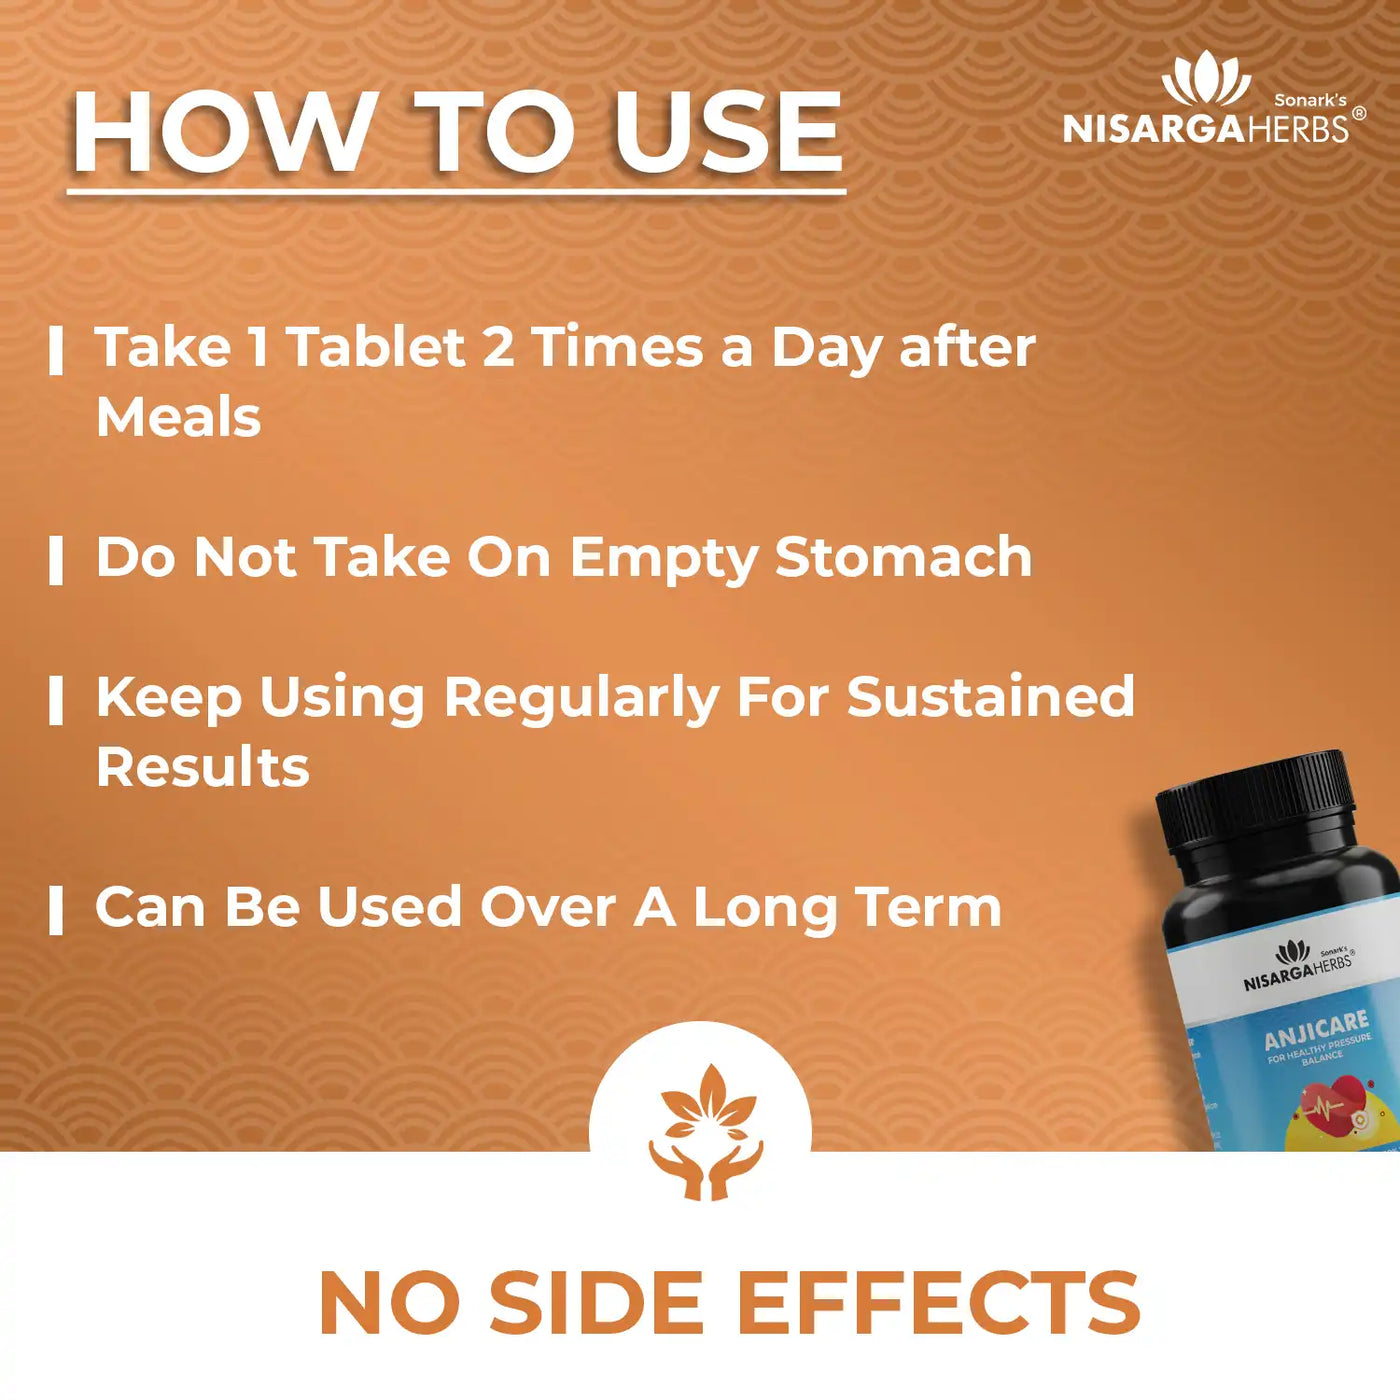 daily use instructions for anjicare tablet.